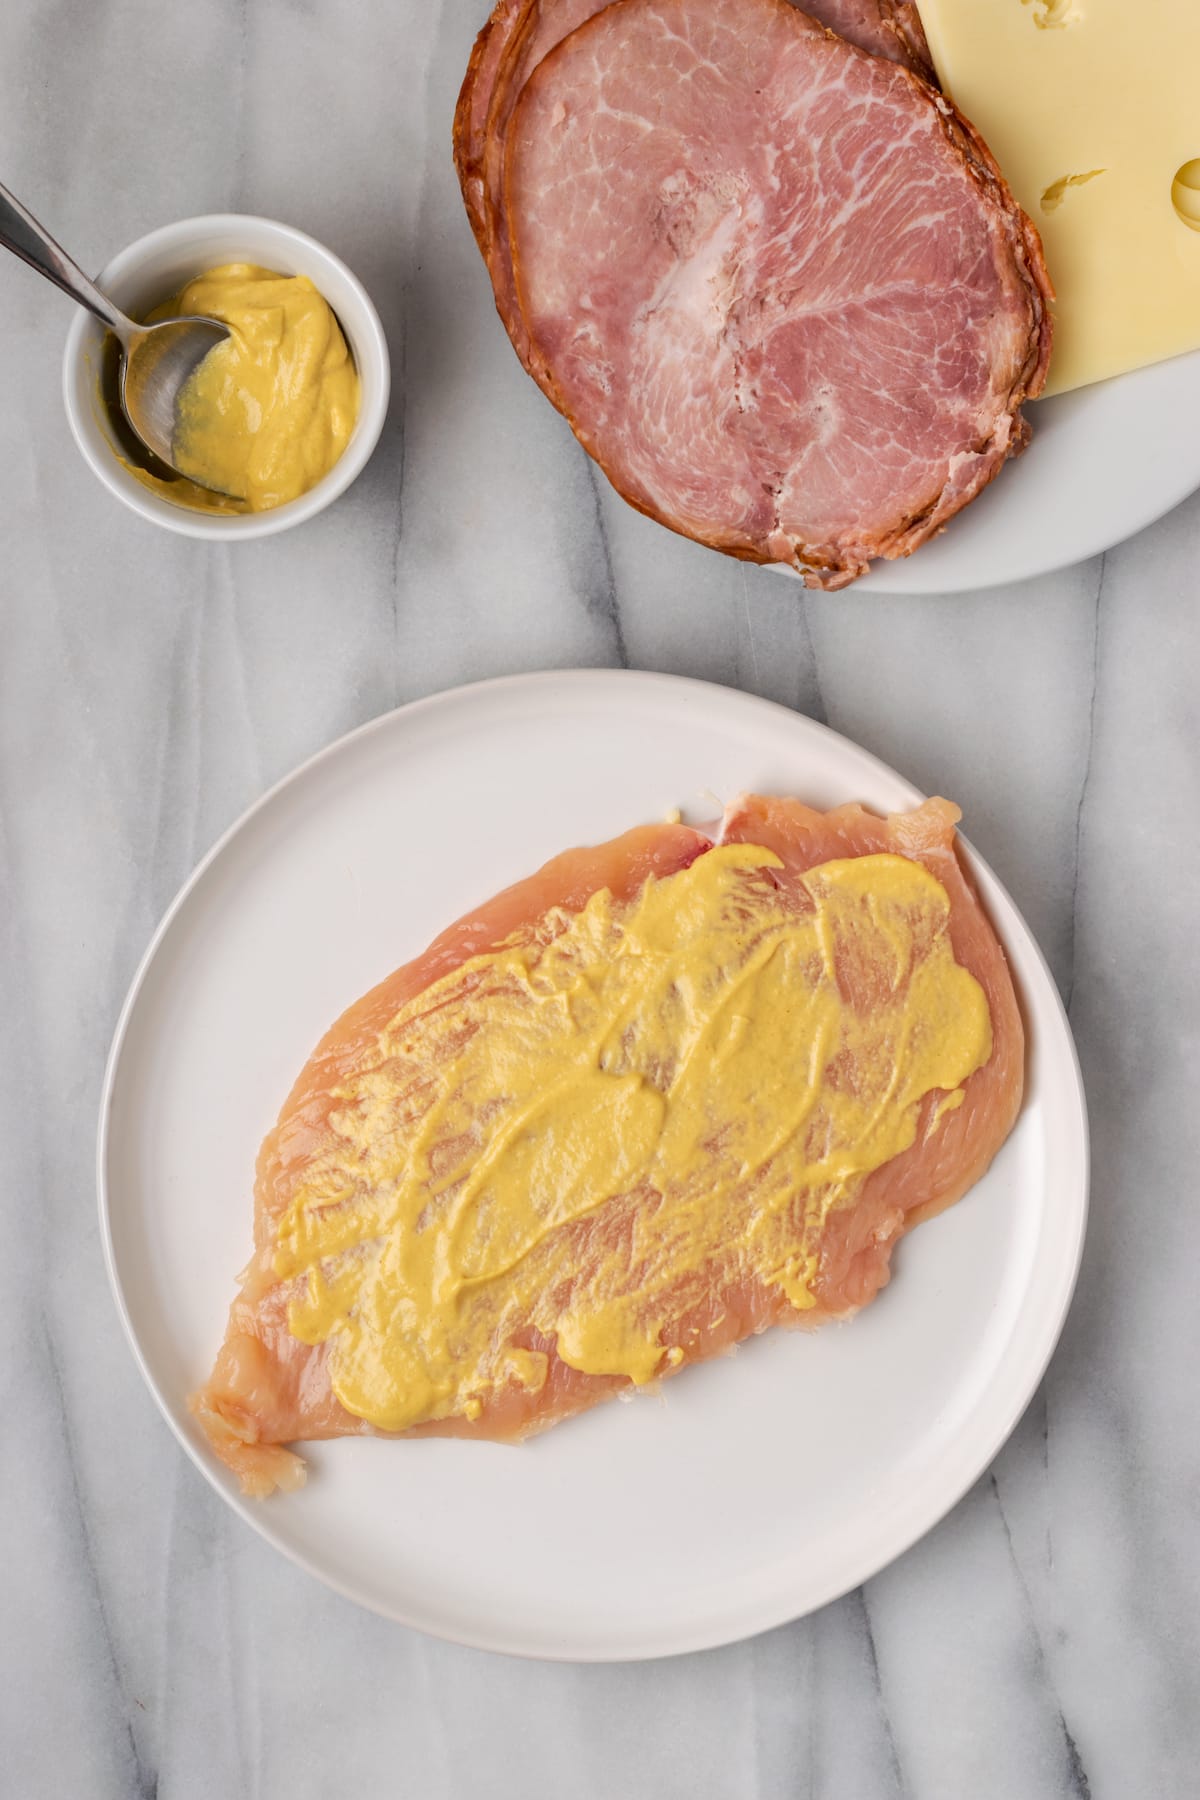 Overhead view of a chicken breast on a plate, covered in mustard, next to a plate of ham and cheese and a ramekin of mustard